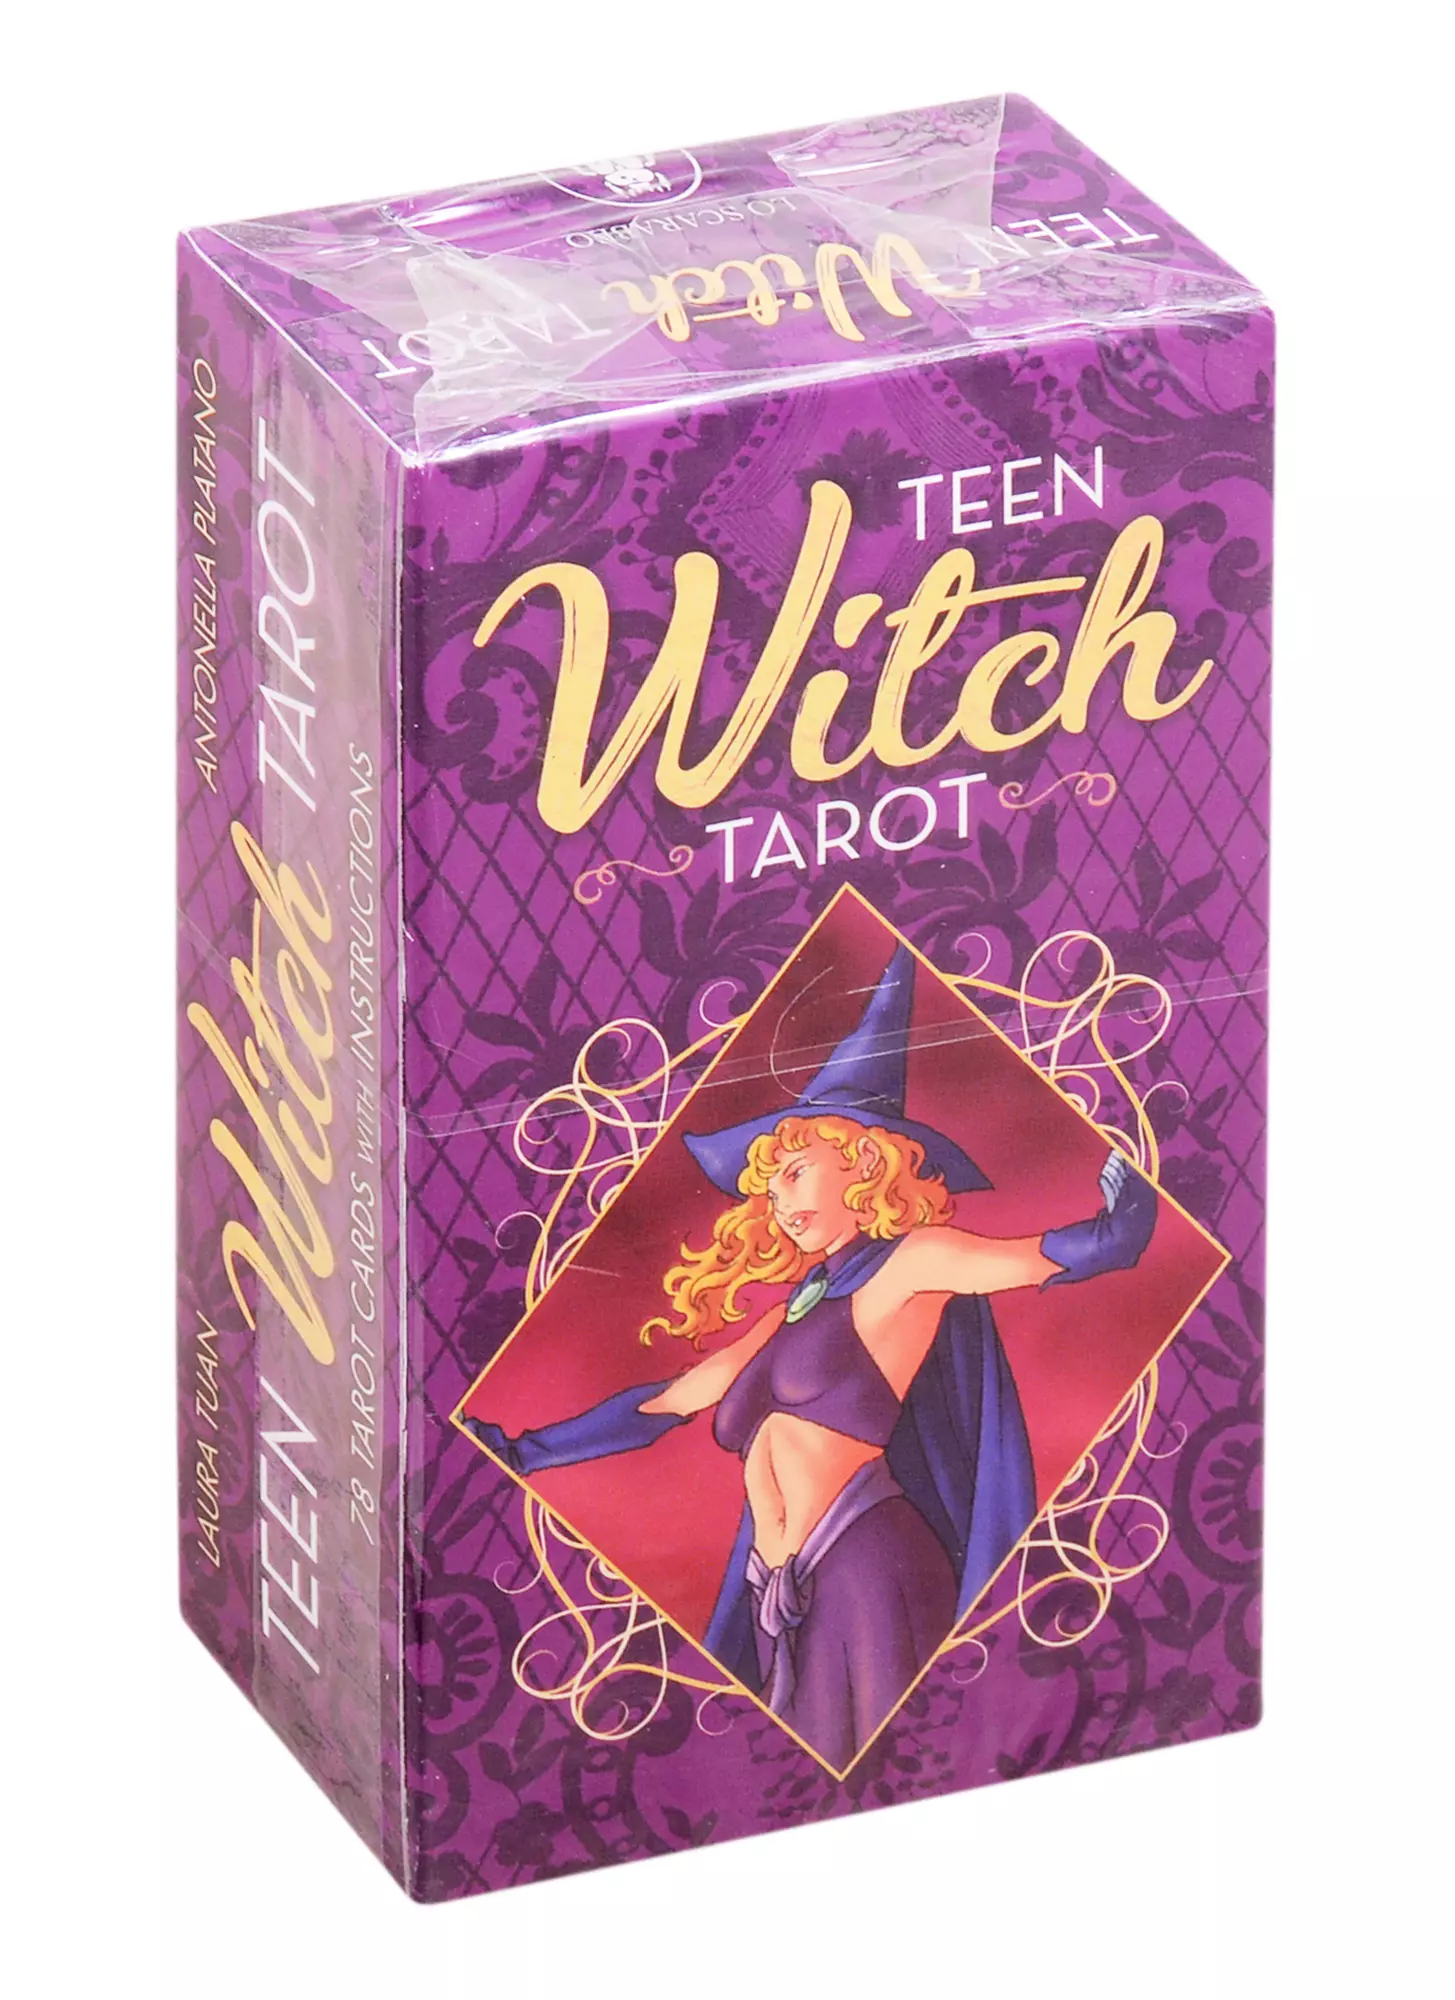 джамал р african american tarot 78 cards with instructions Таро Юных Ведьм / Teen Witch Tarot (78 Tarot Cards With Instructions)